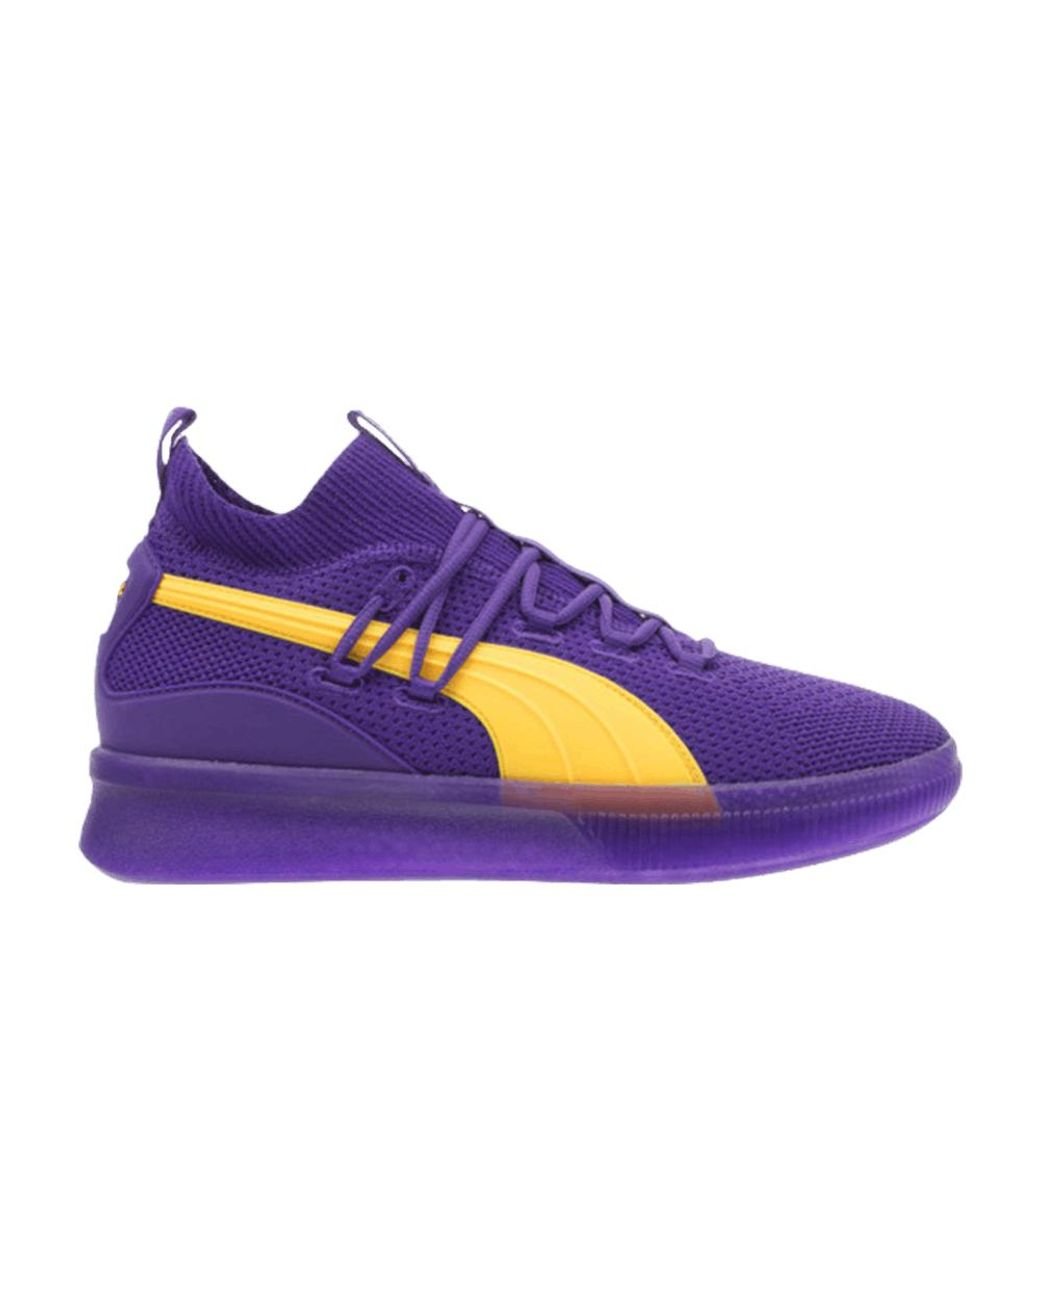 PUMA Rubber Clyde Court Gw Shoes in Purple for Men - Save 46% - Lyst